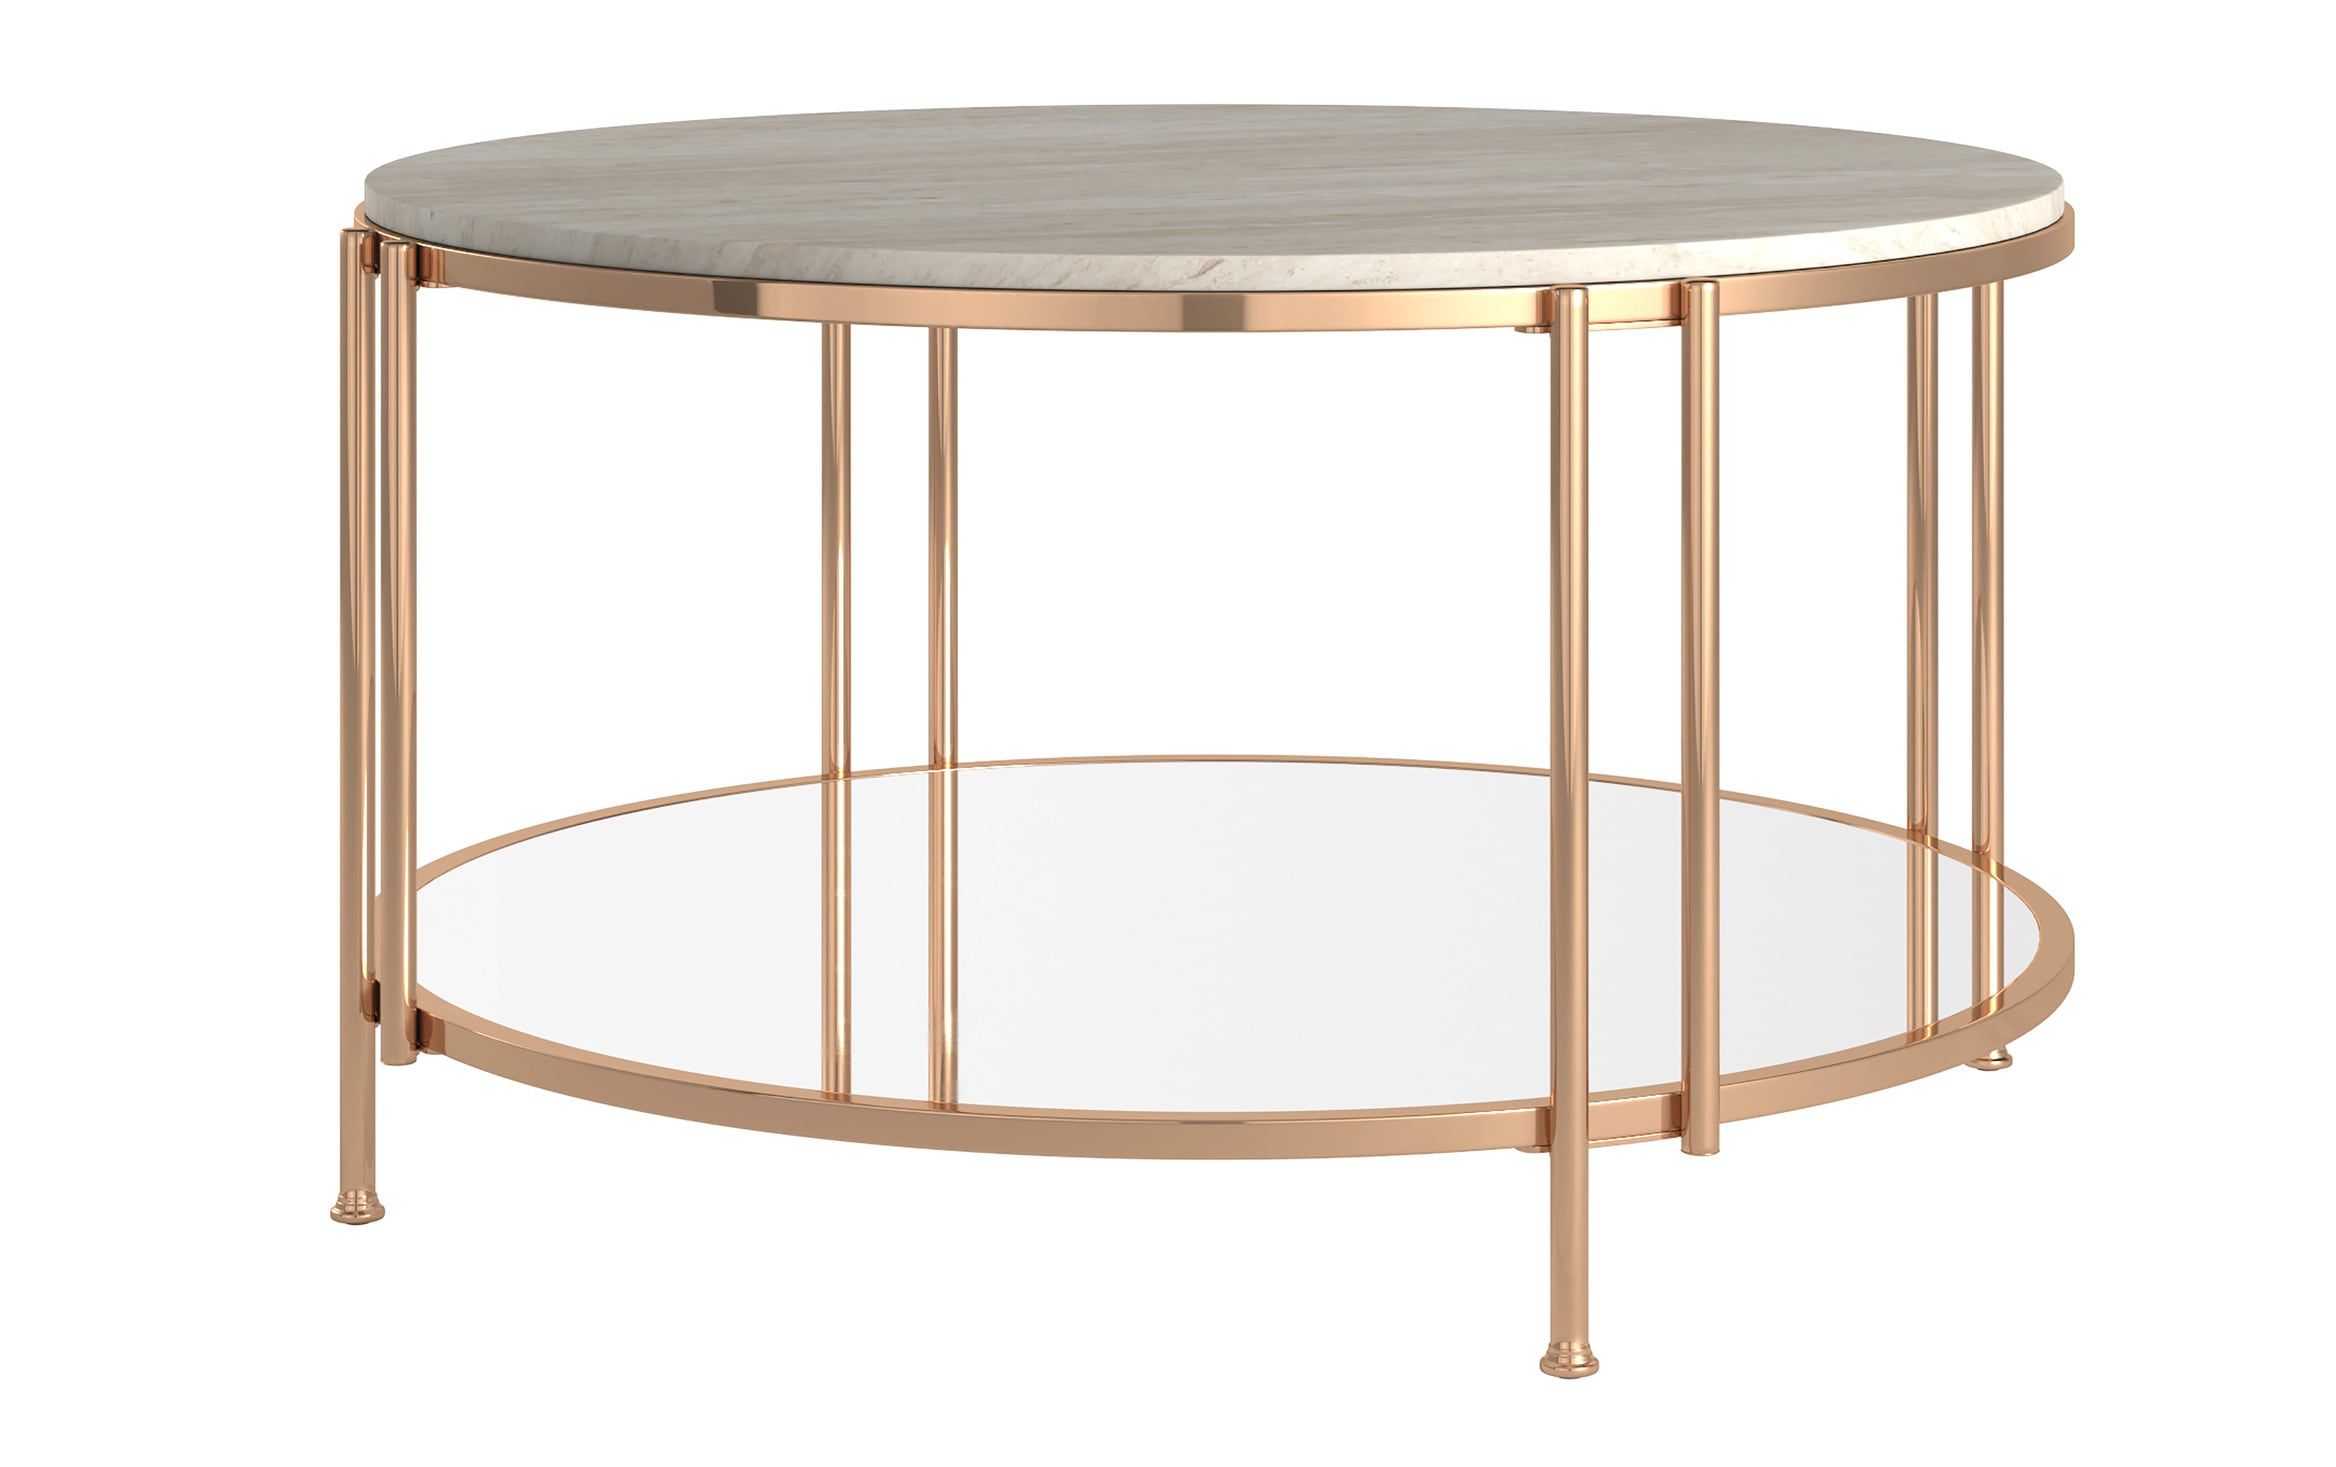 Lana Faux Marble Coffee Table | Bob's Discount Furniture Throughout Faux Marble Gold Coffee Tables (View 9 of 20)